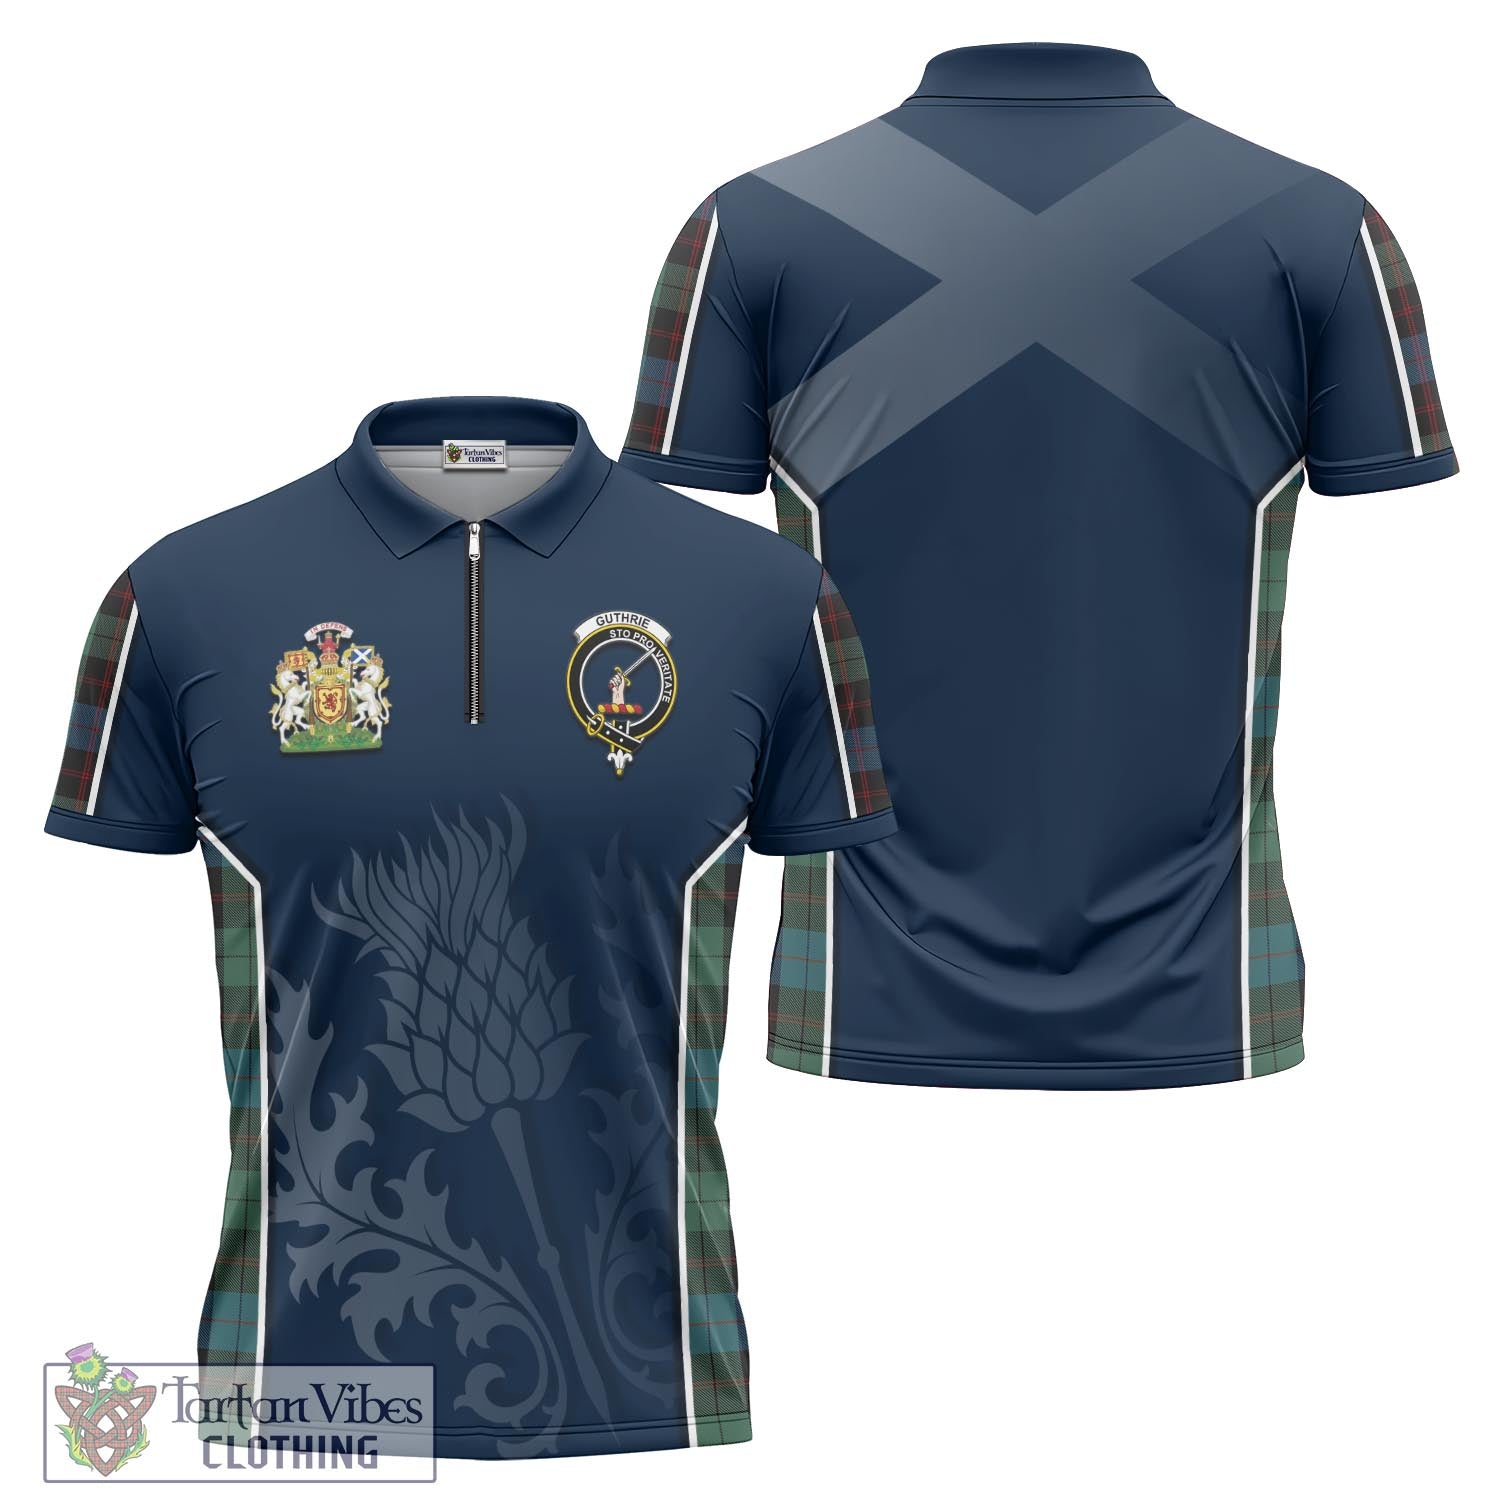 Tartan Vibes Clothing Guthrie Tartan Zipper Polo Shirt with Family Crest and Scottish Thistle Vibes Sport Style